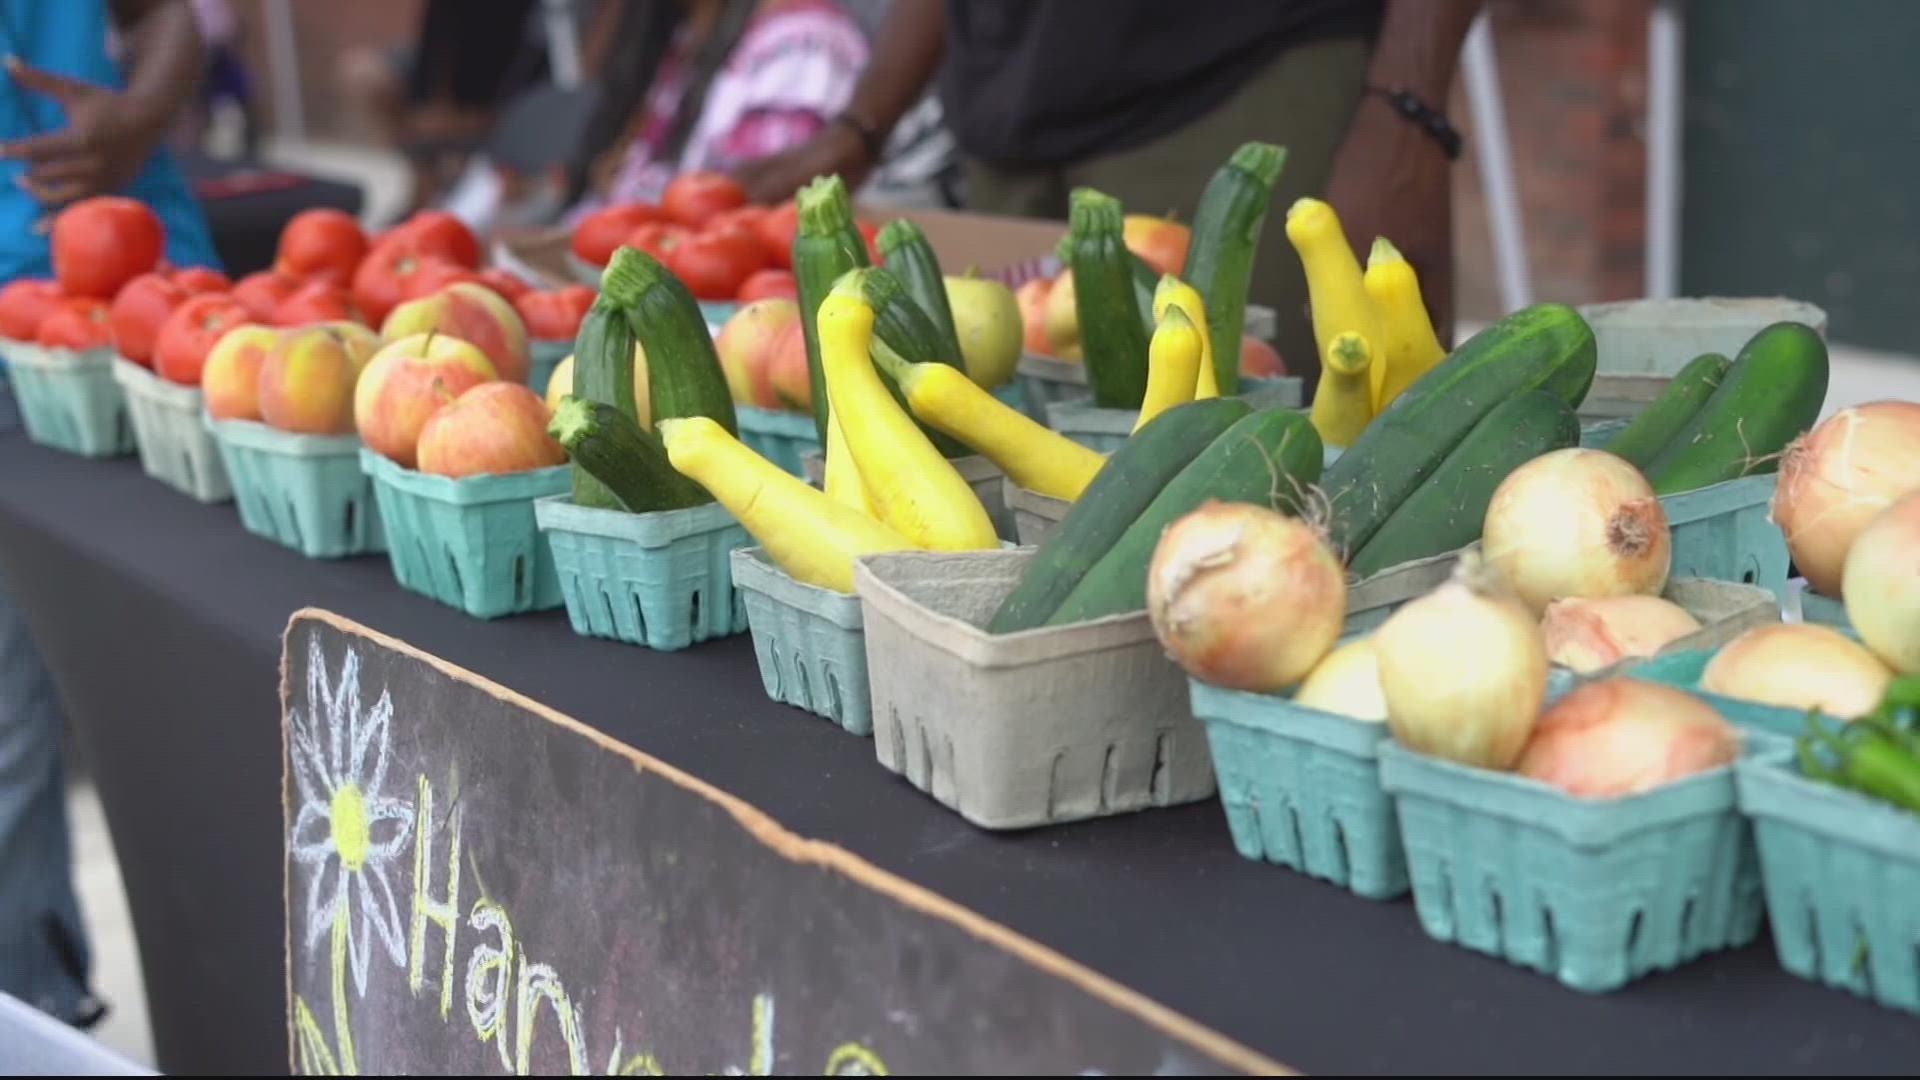 Parts of Southeast DC have little access to quality food. It’s why farmers markets are so vital to these communities.